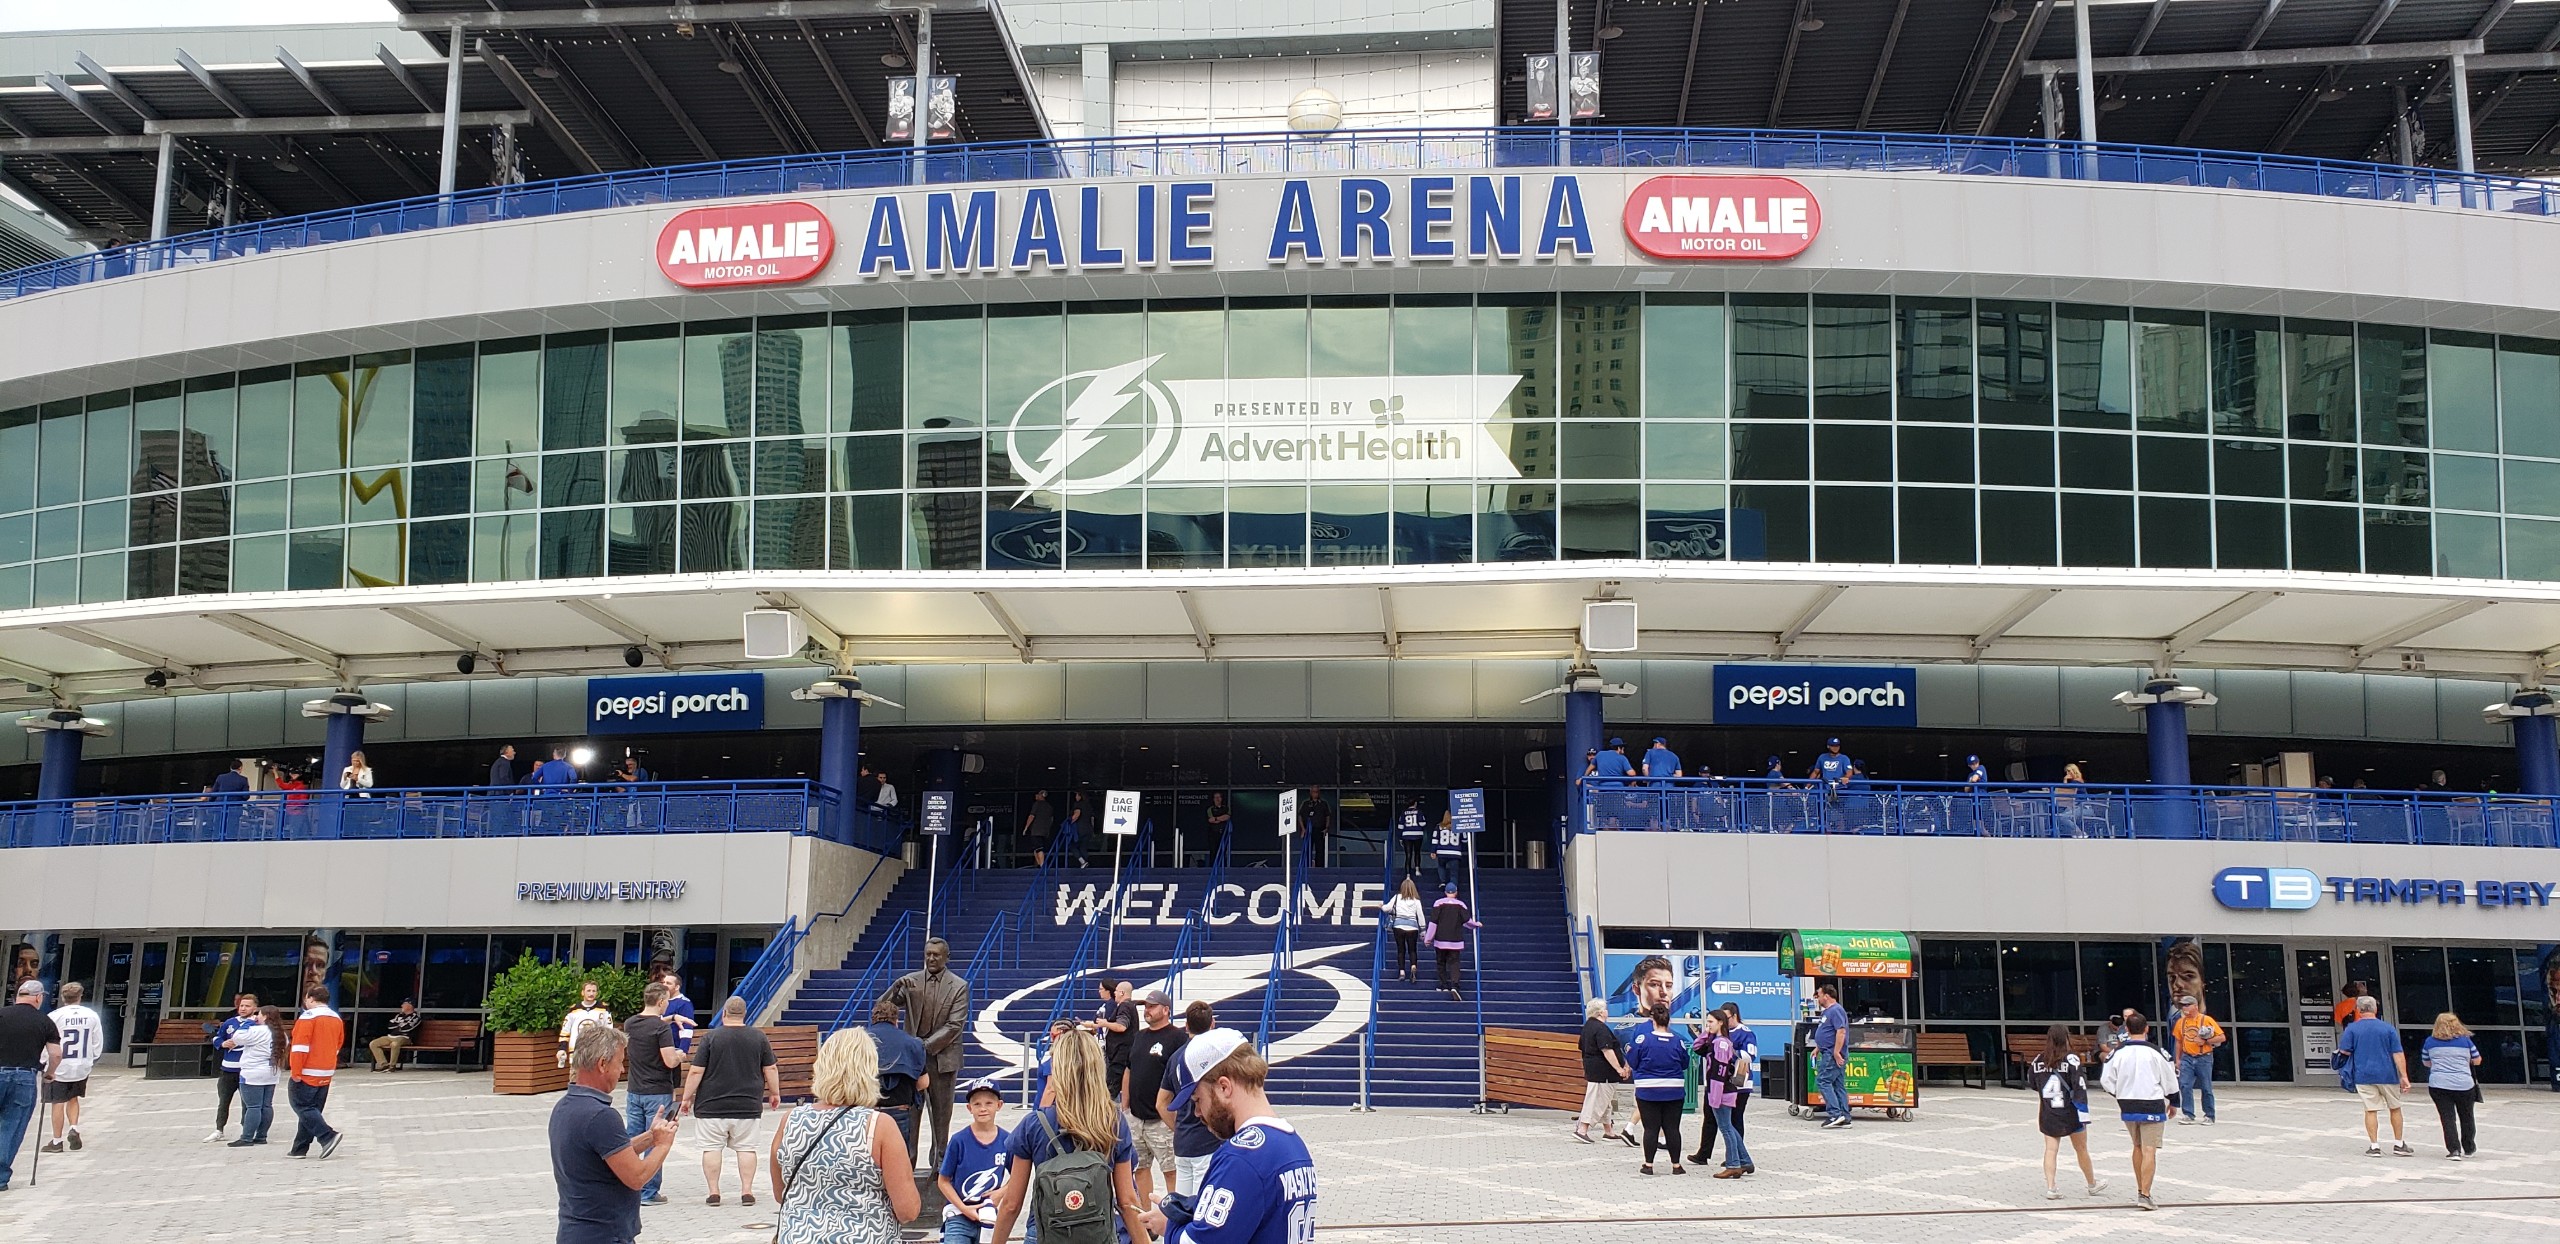 Tampa Bay Lightning fans gather around Amalie Arena to cheer in person